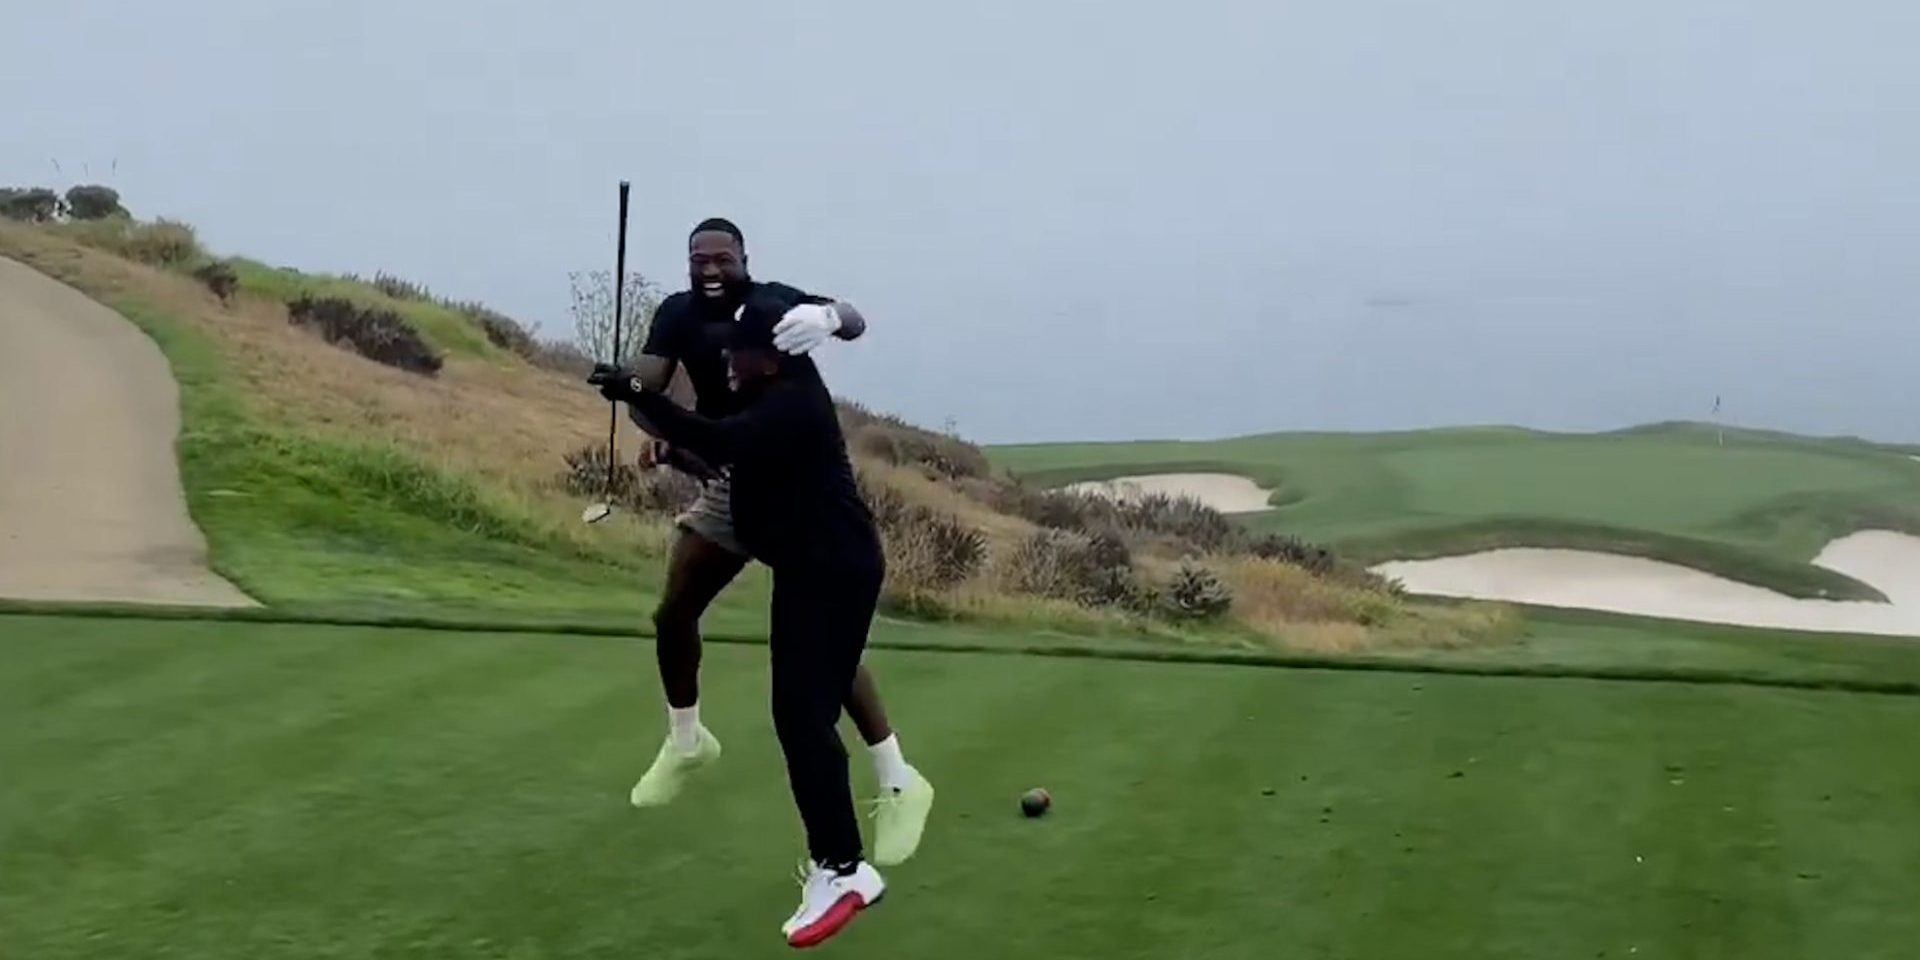 Dwyane Wade reacts like a little boy to his first hole in one